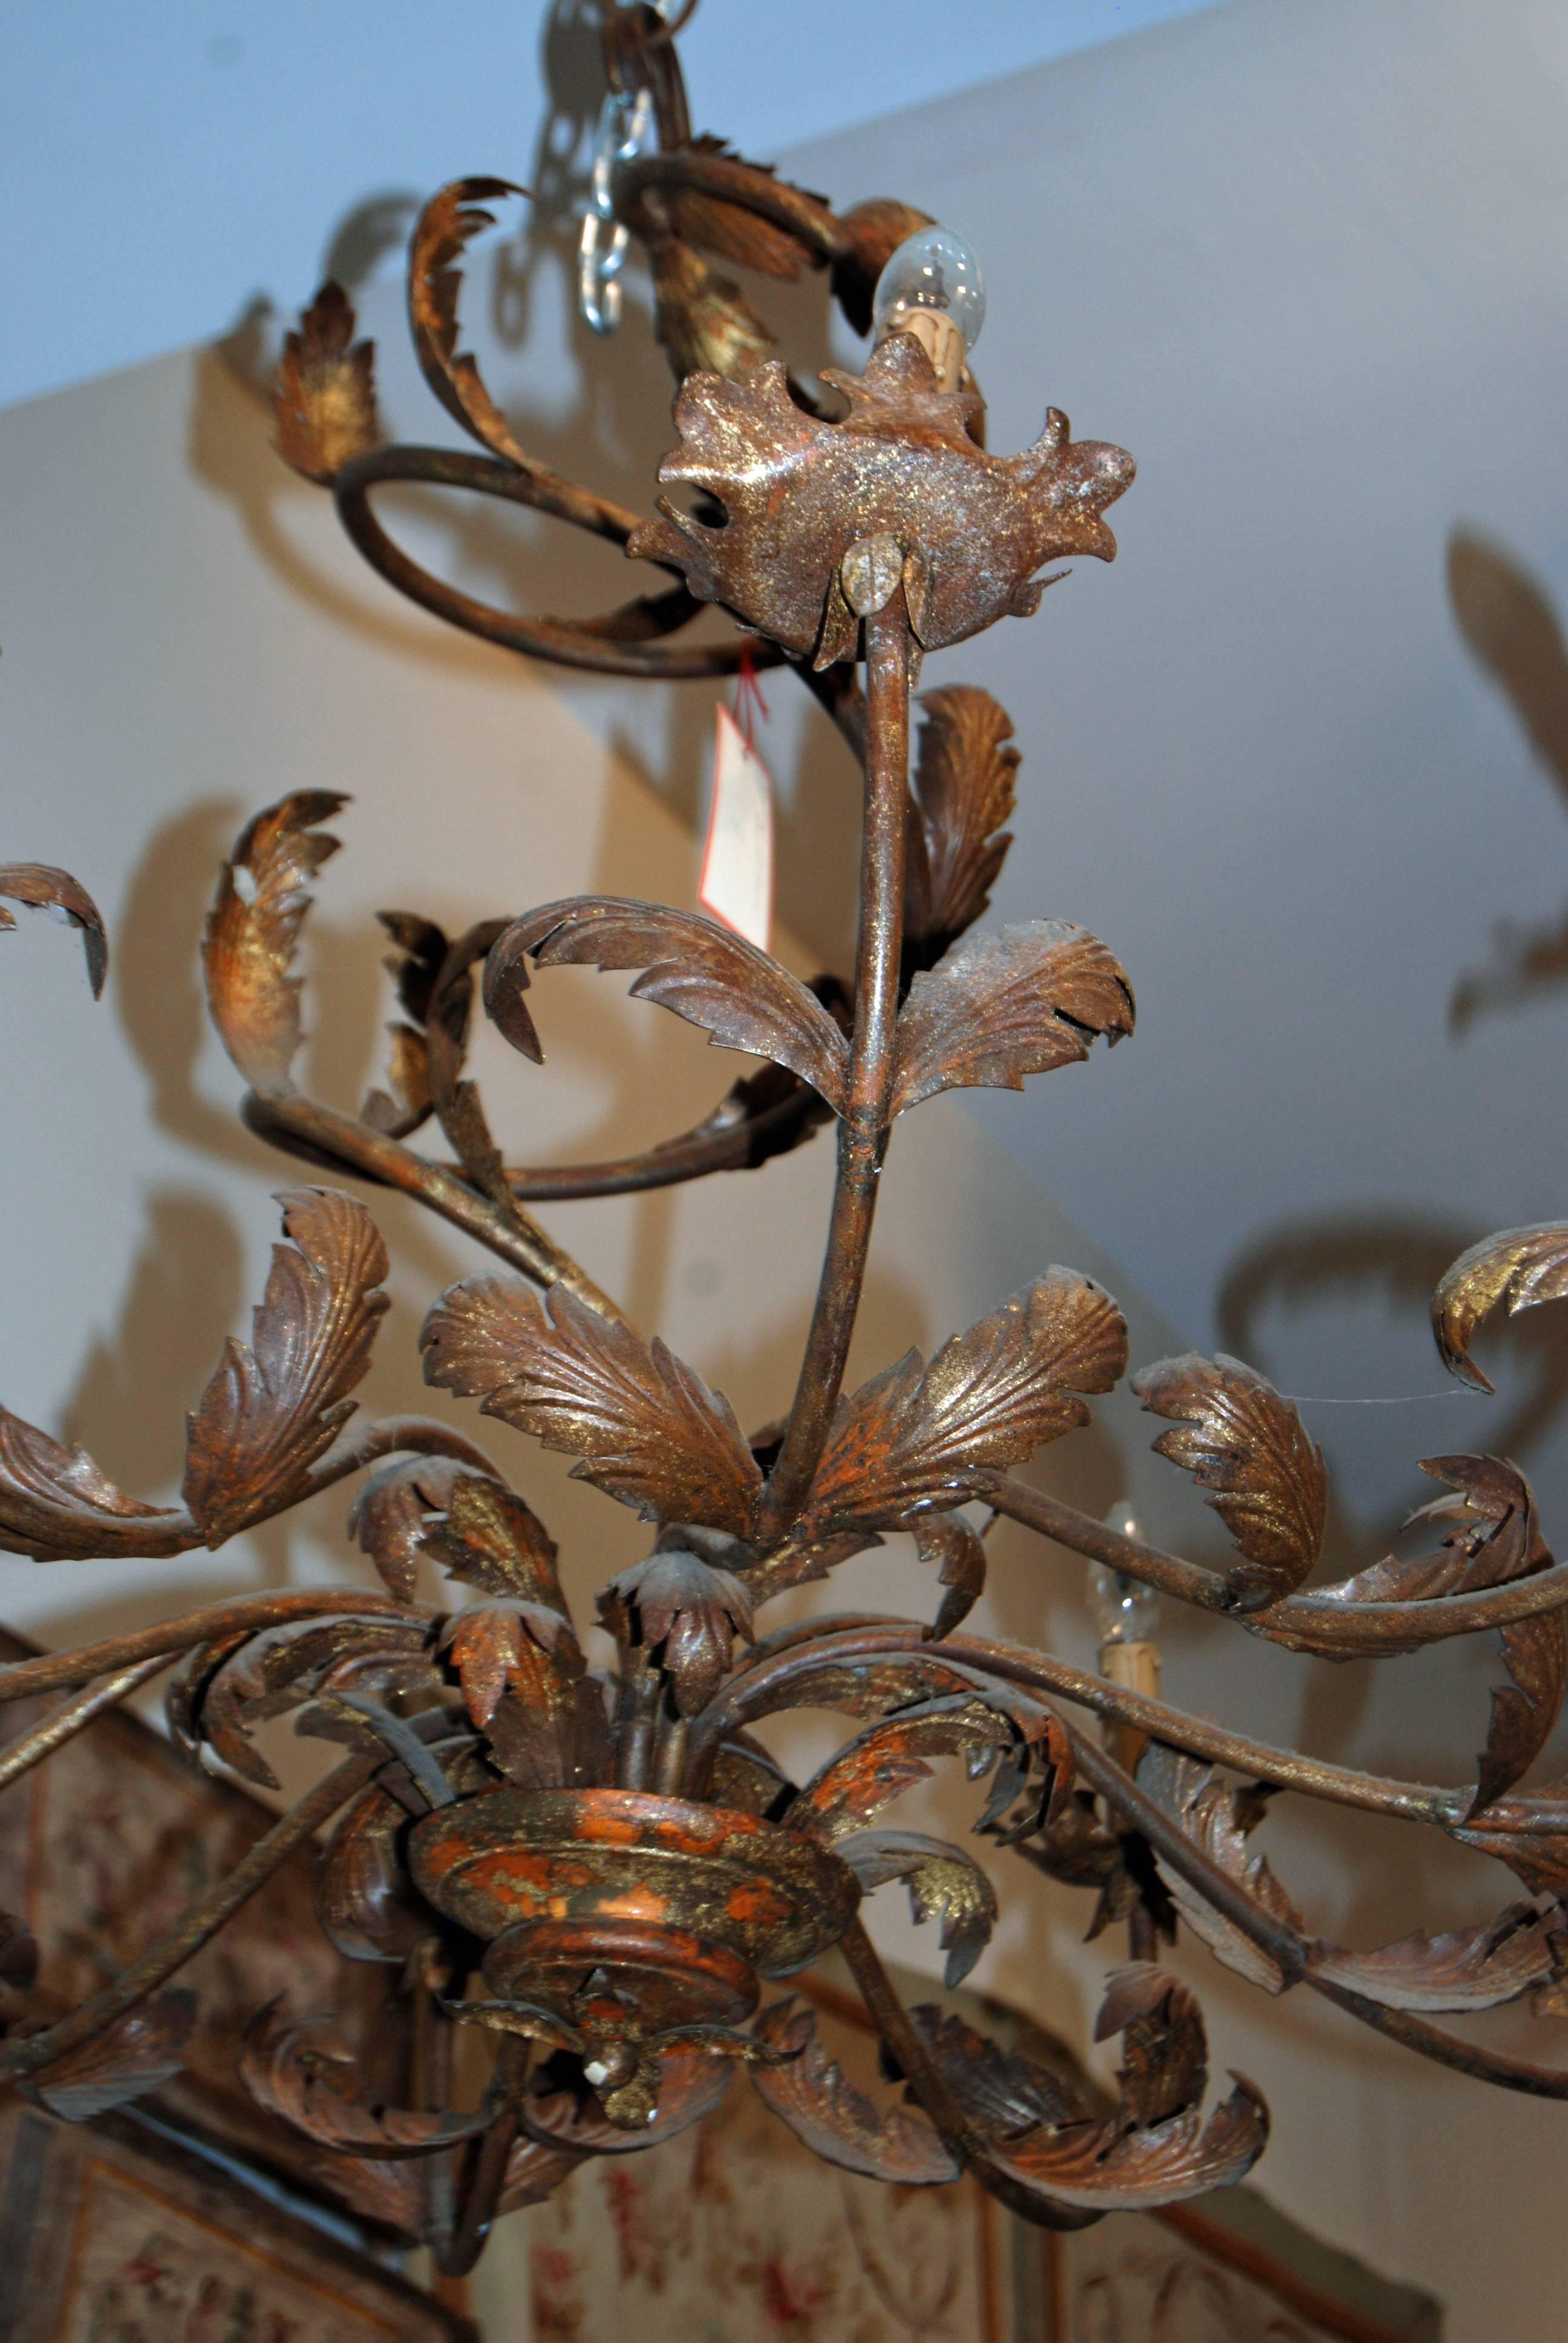 Beautiful pair of iron chandeliers
there is a slight difference in coloration depending on lighting.